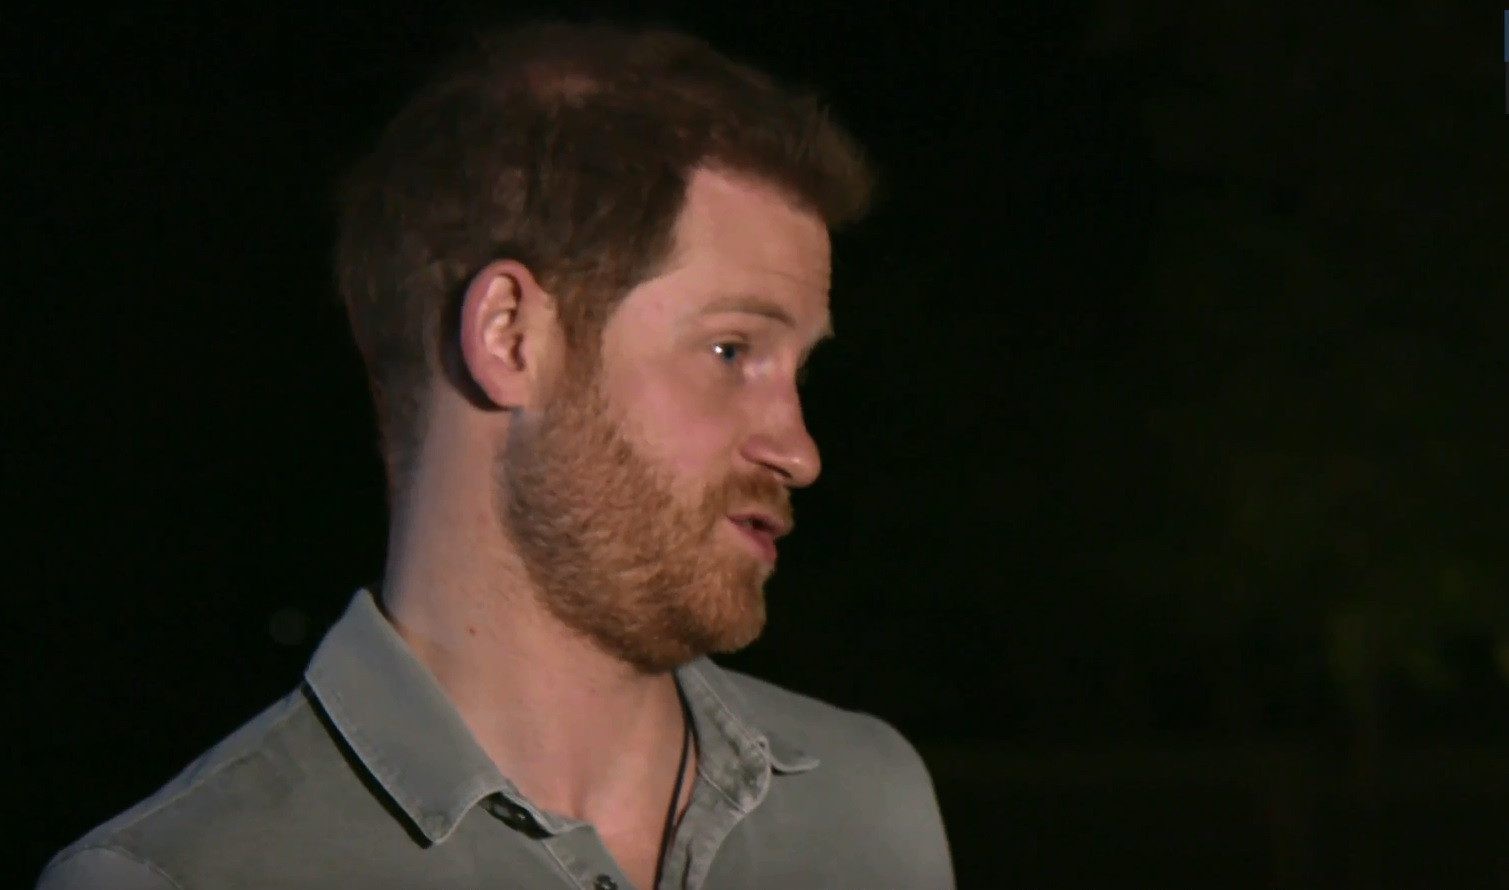 Prince Harry has spoken for the first time about the growing rift between him and brother William during an interview with ITV